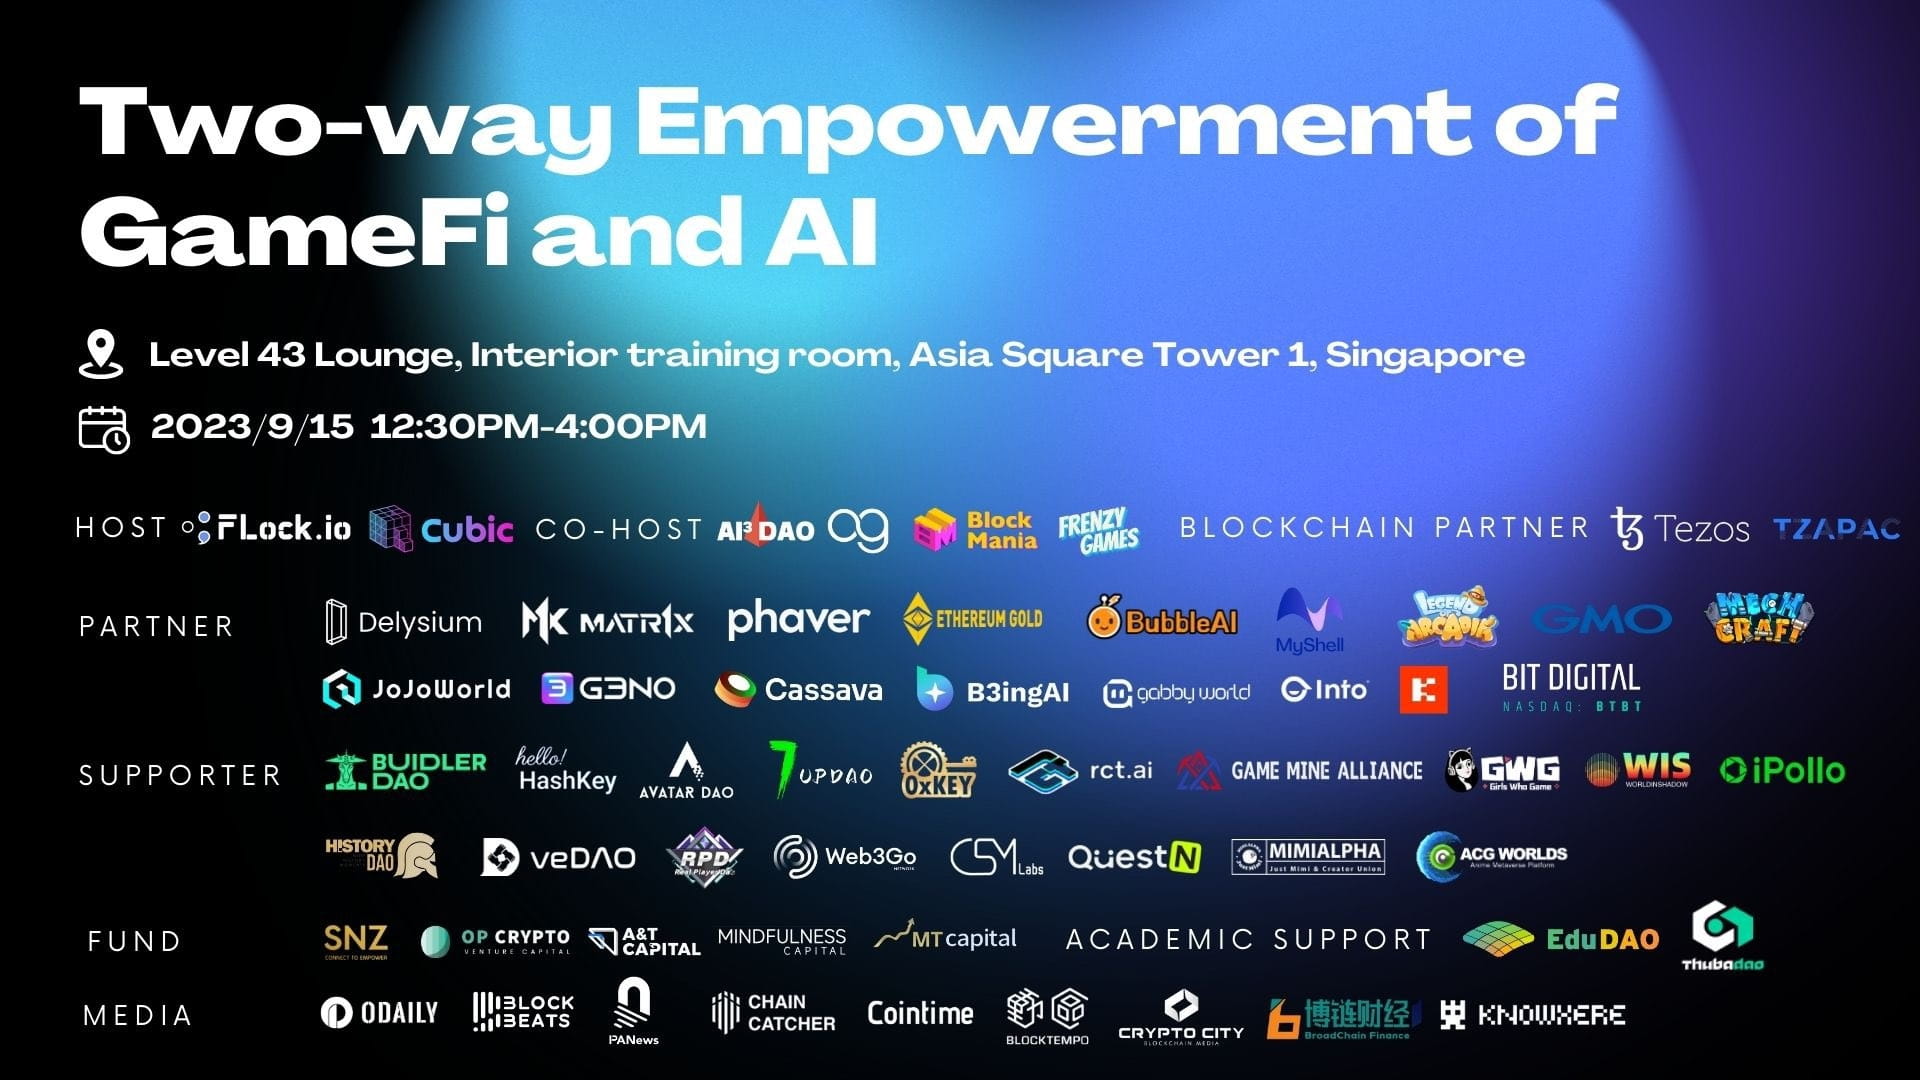 Two-way Empowerment of GameFi and AI - TOKEN2049 Singapore Side Event